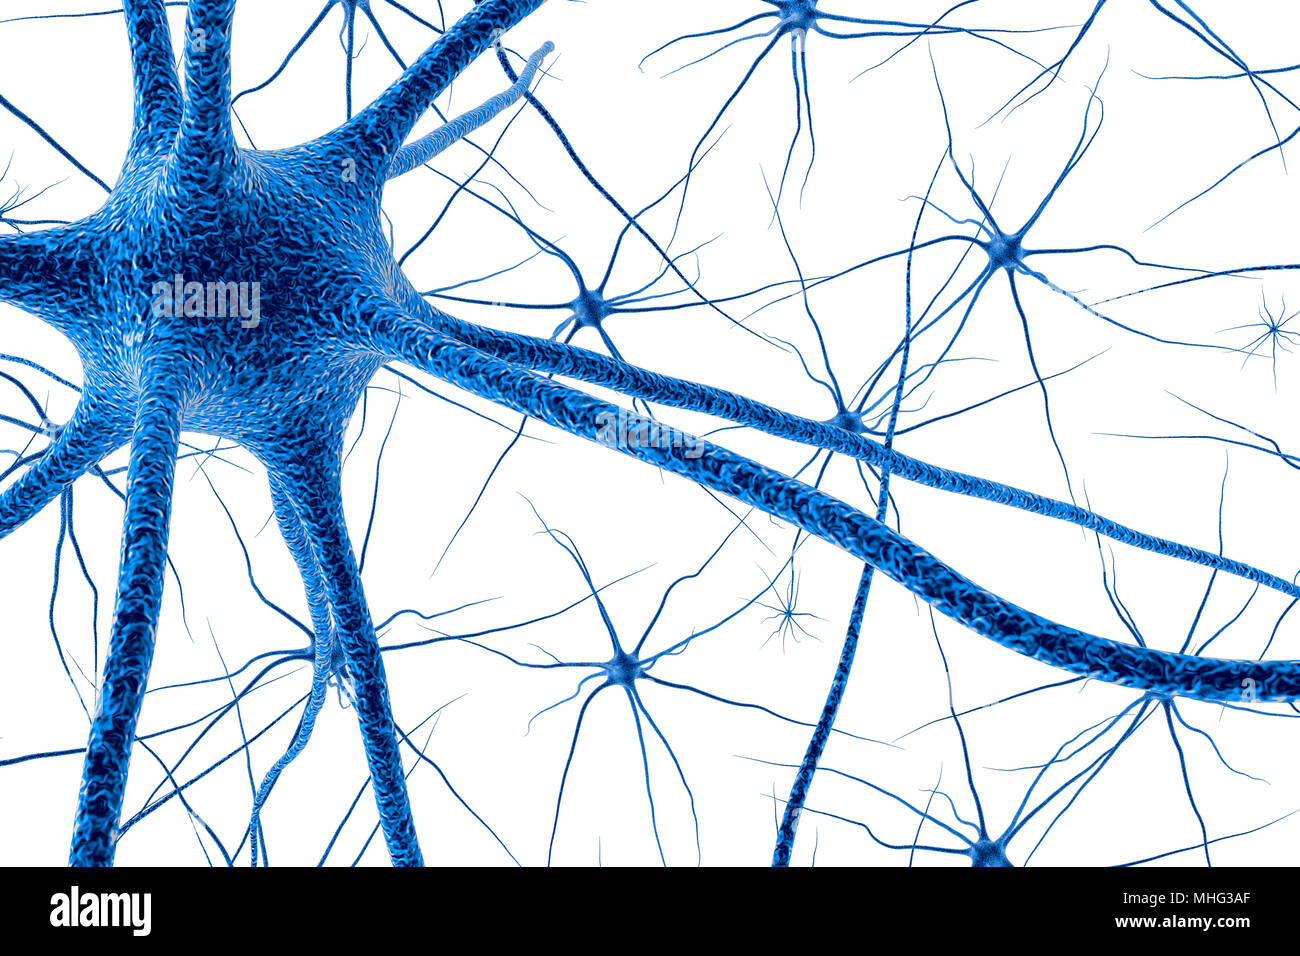 The neurons of the brain cell. 3D render Stock Photo